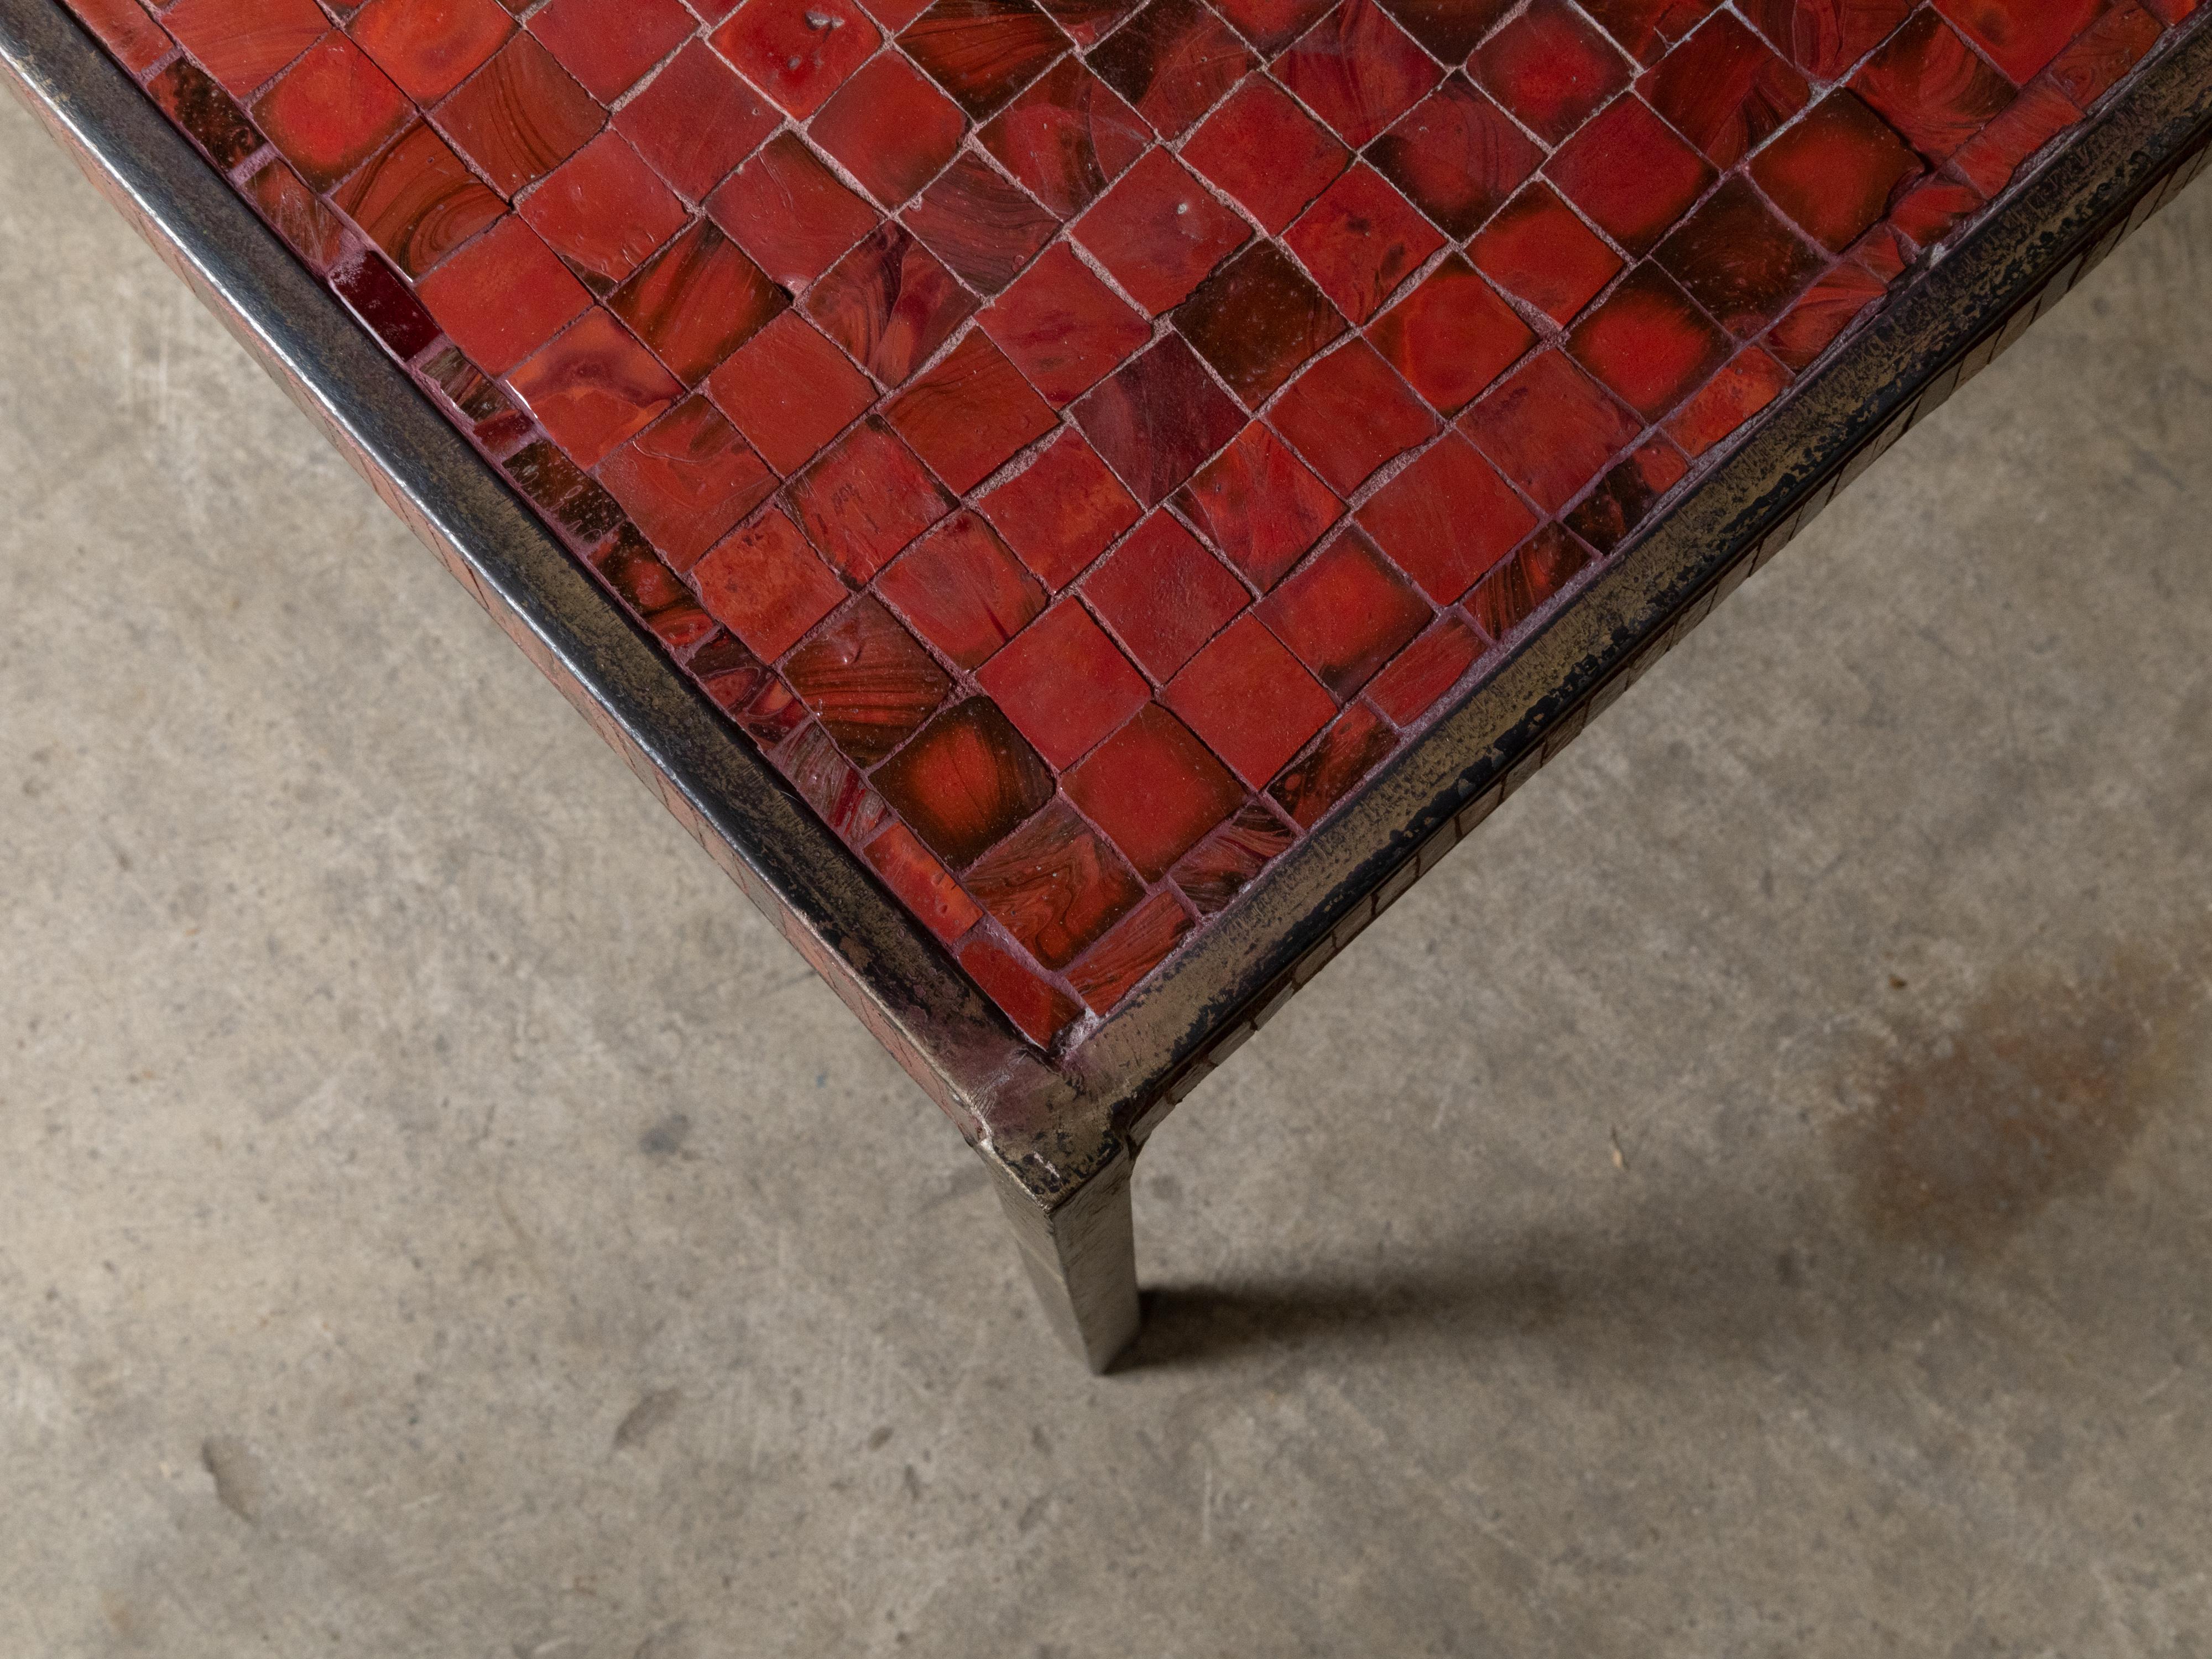 Midcentury Italian Mosaic Table with Iron Base and Red Glass Tile Style Top For Sale 5